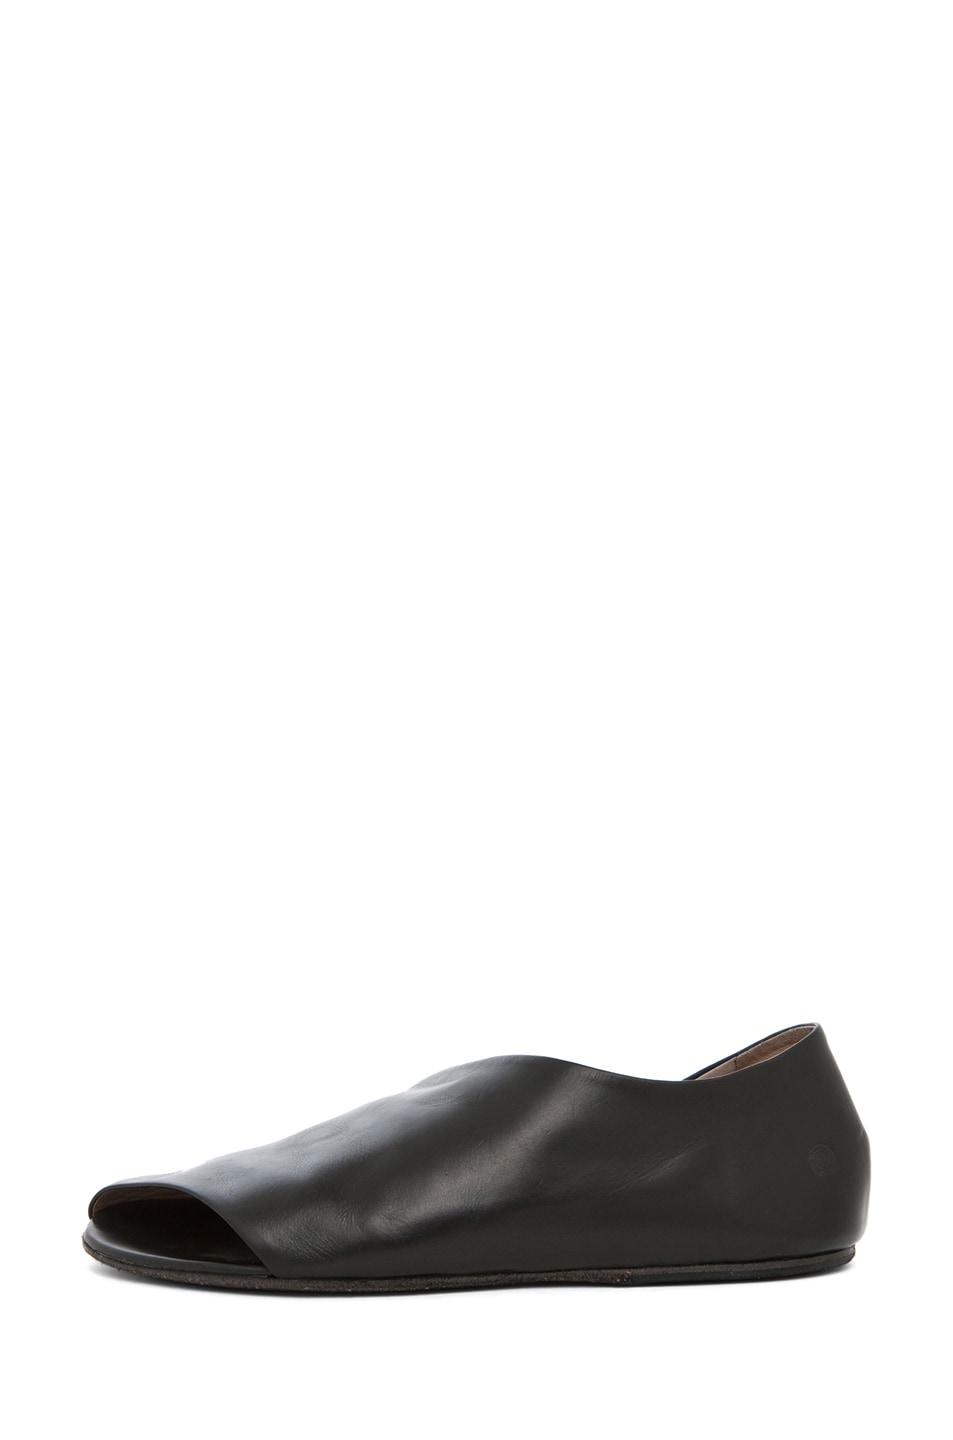 Image 1 of Marsell Arsella Flat in Black